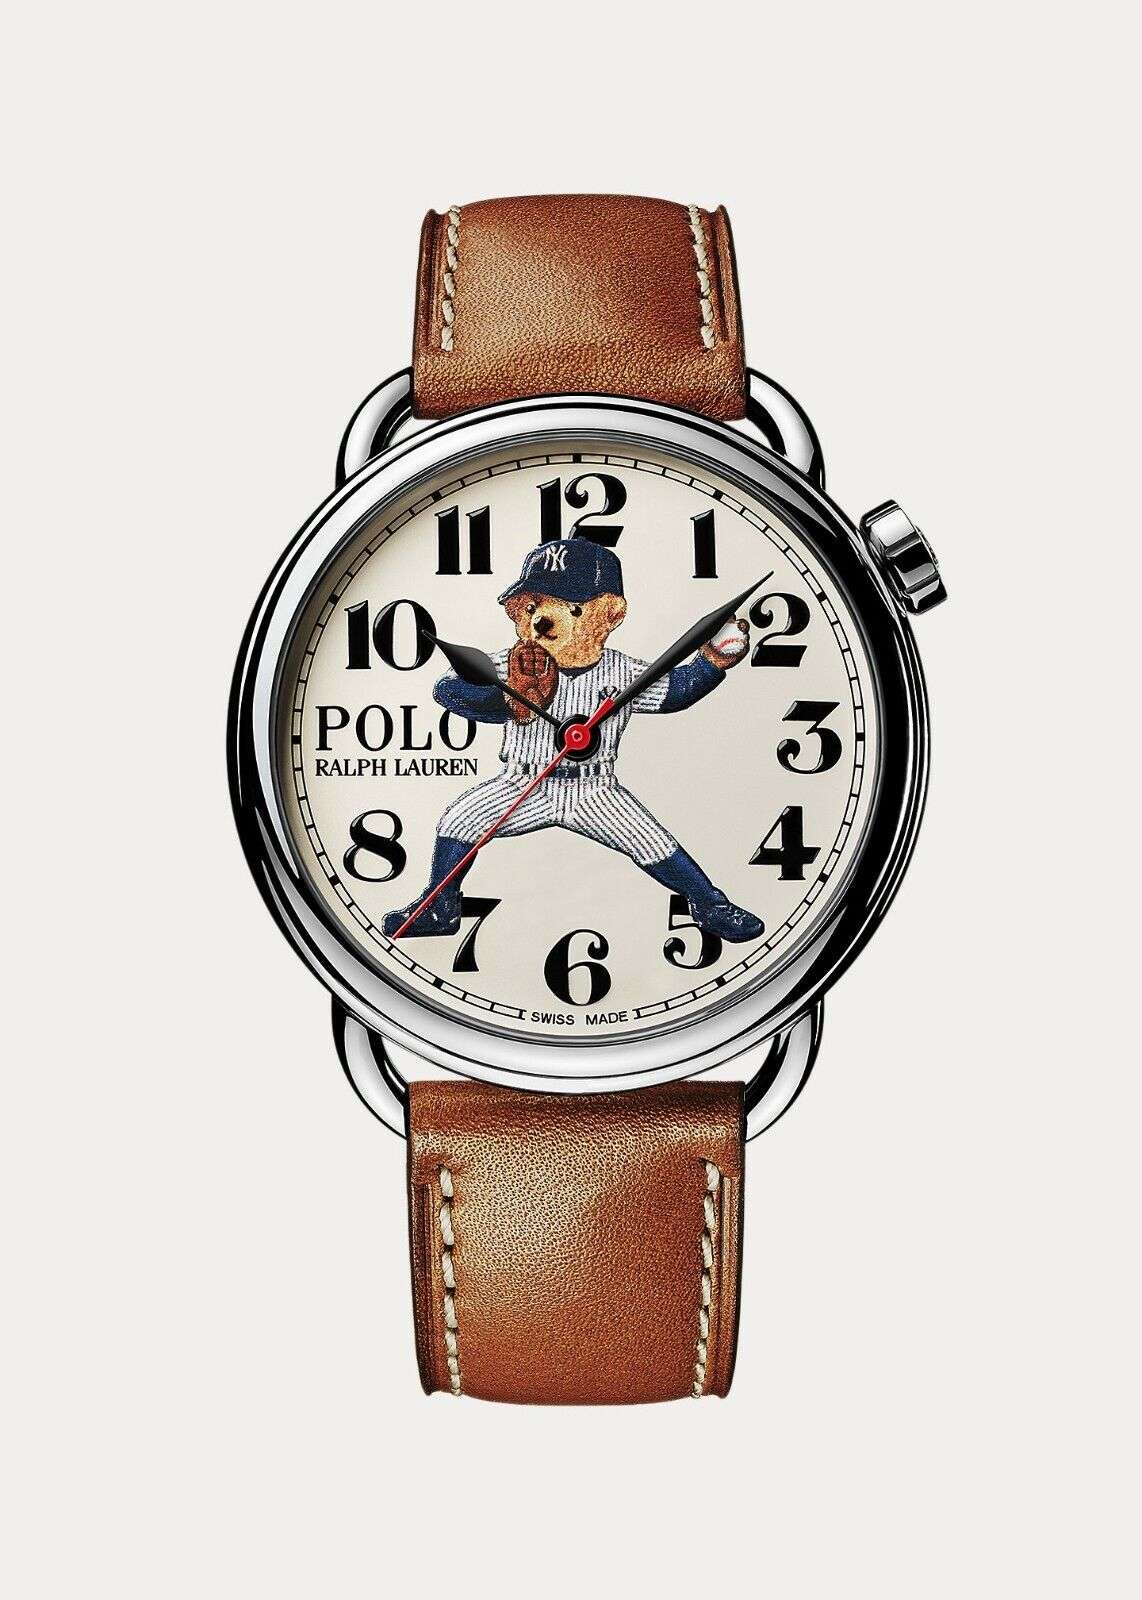 NEW Polo Bear Yankees Watch 42mm Limited Edition Automatic Ralph Lauren ...